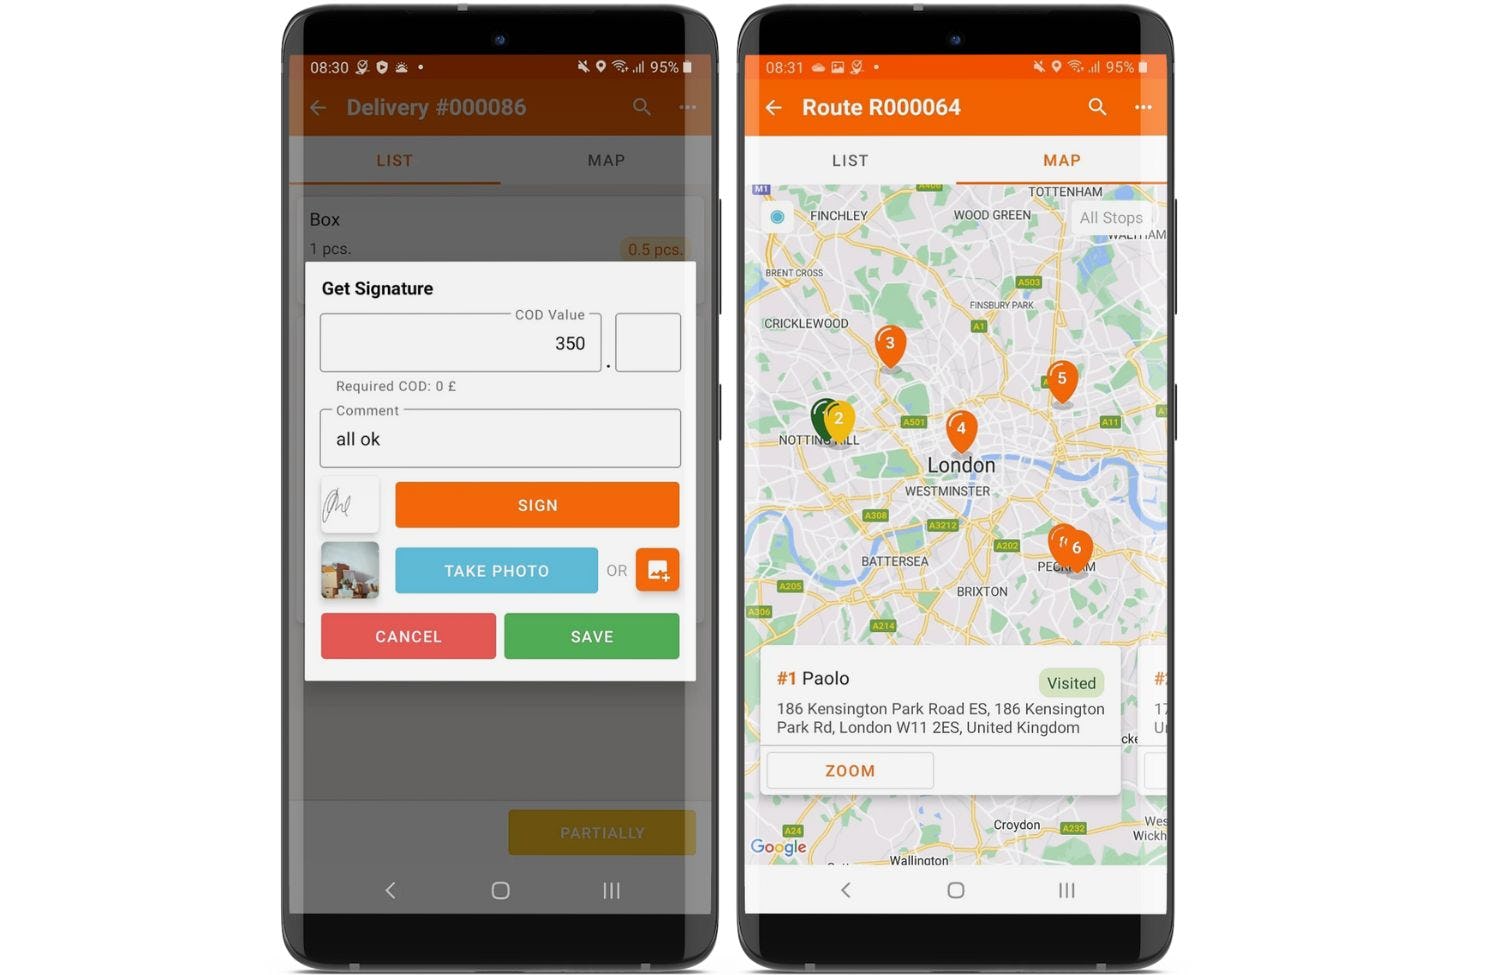 Track-POD Software - Proof of Delivery app for Courier Drivers